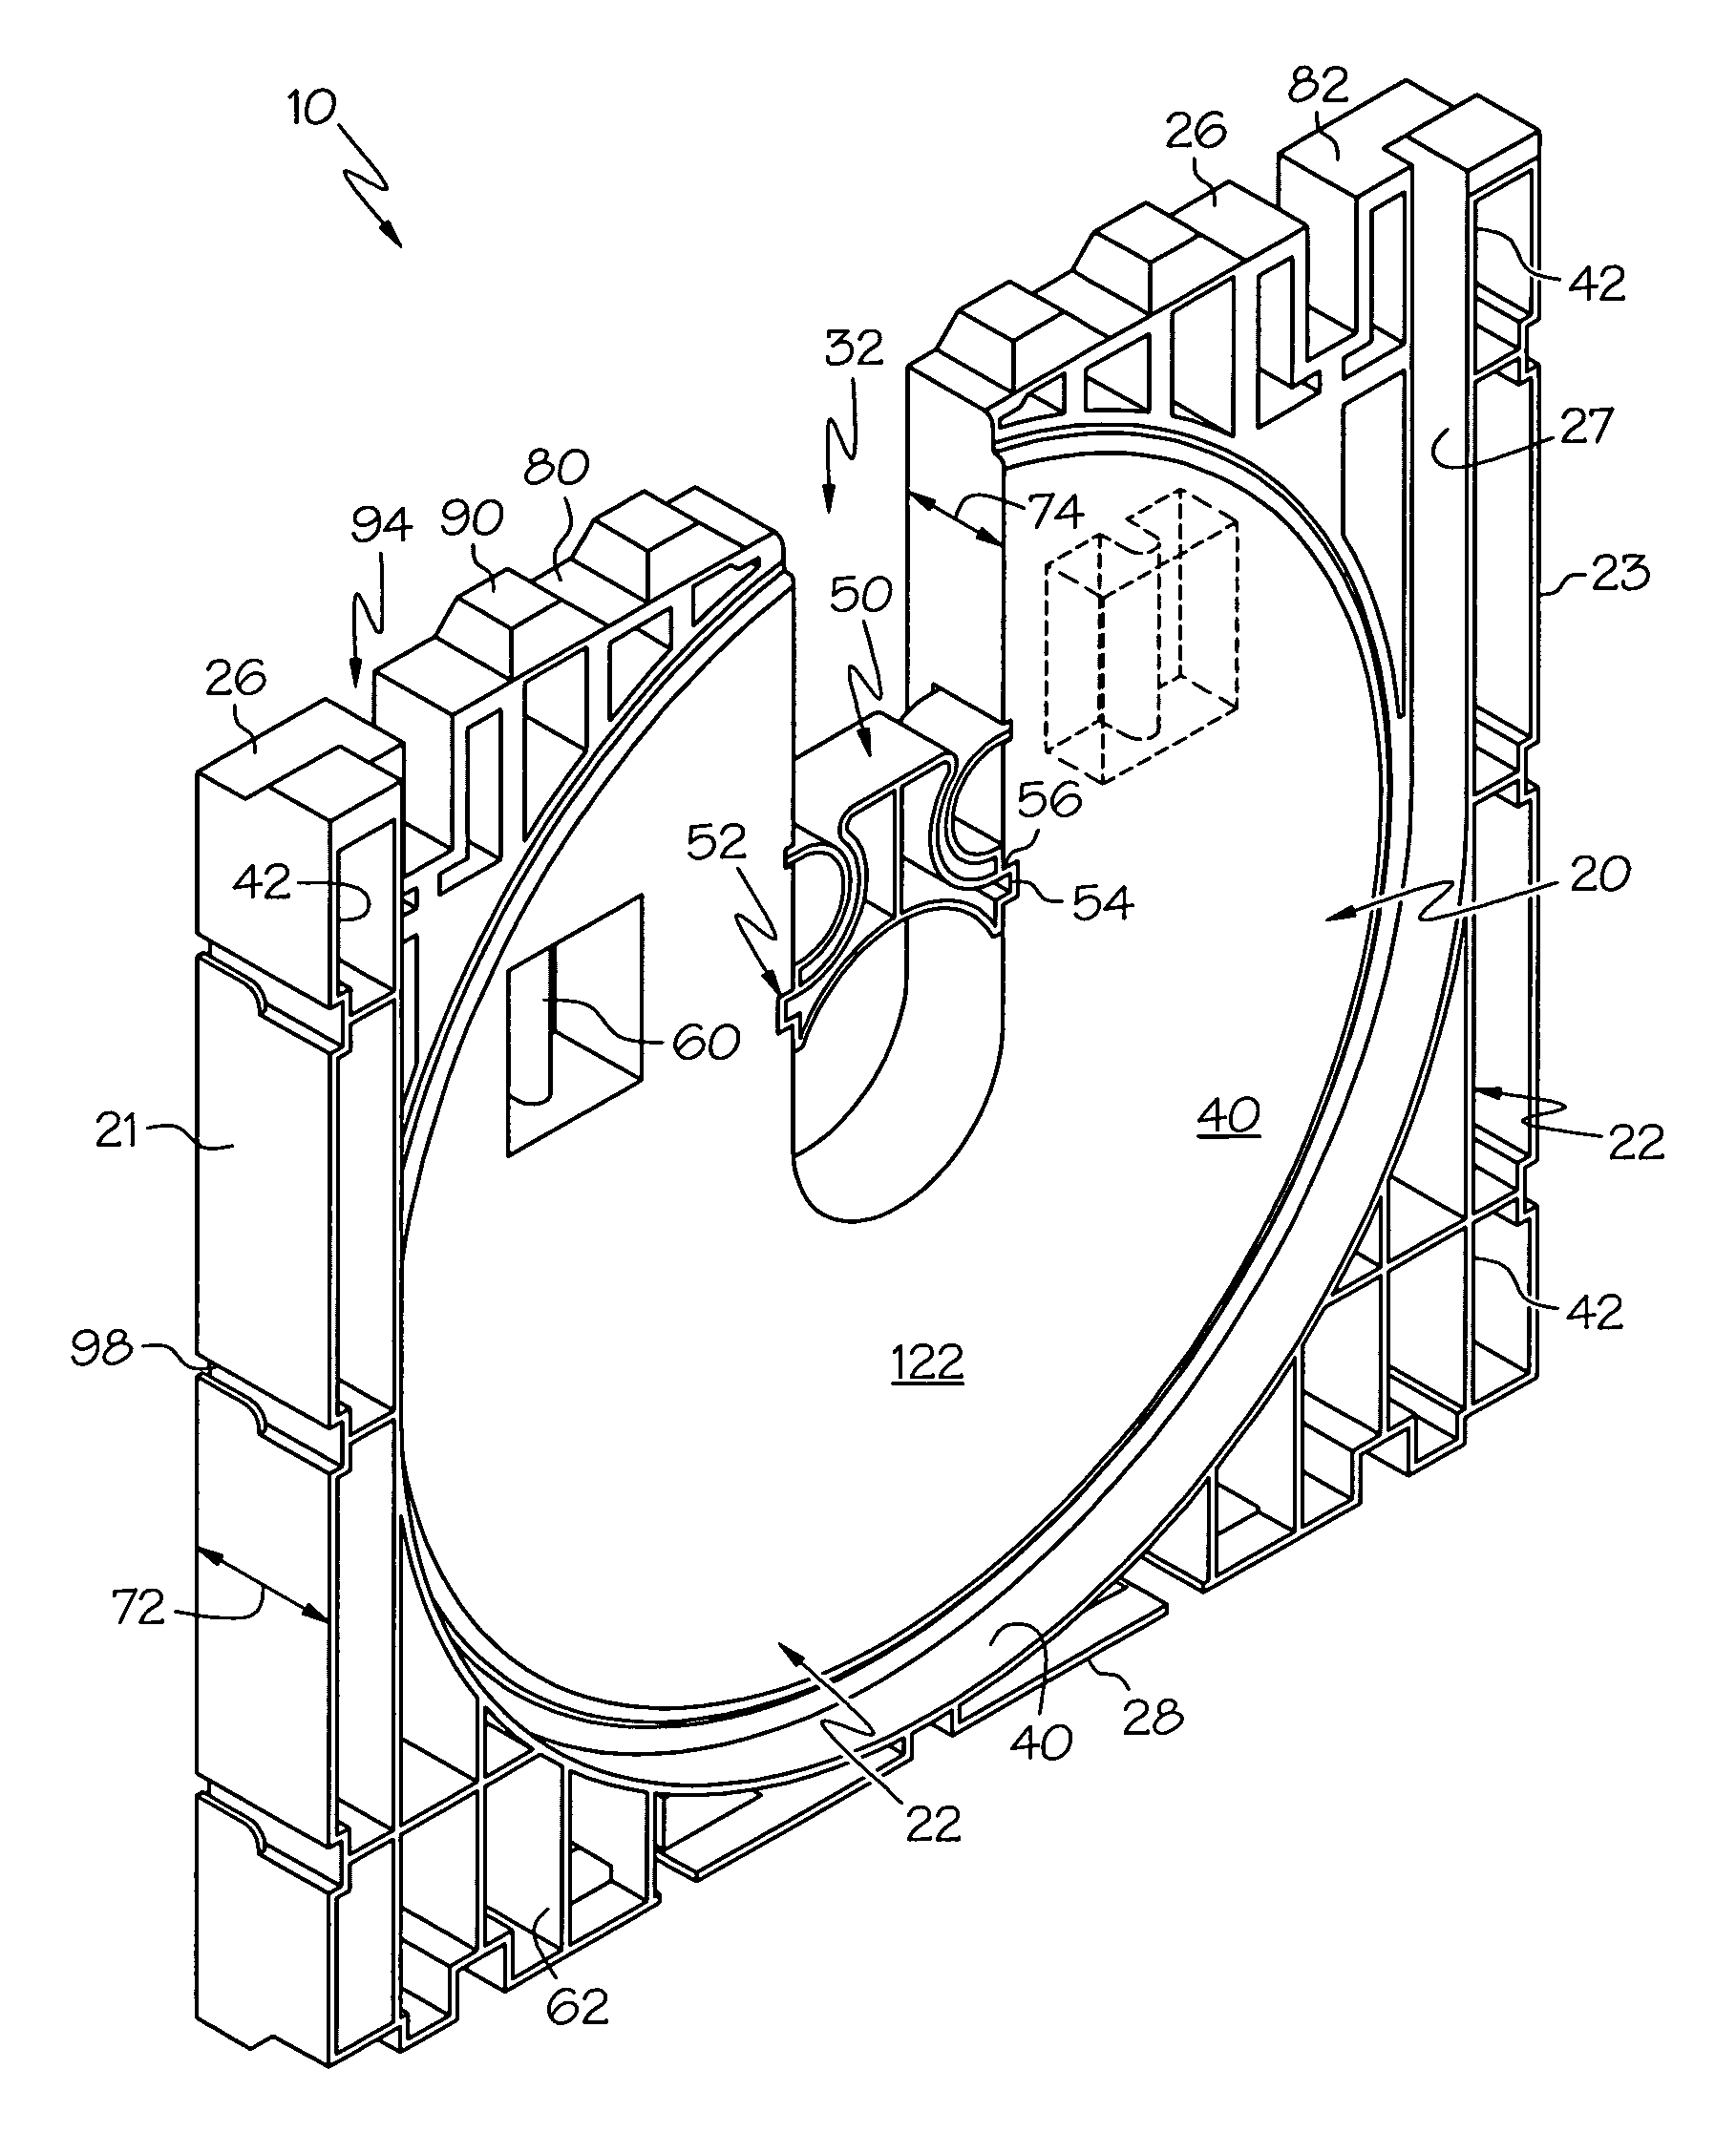 End-board for a core-wound roll product packaging system